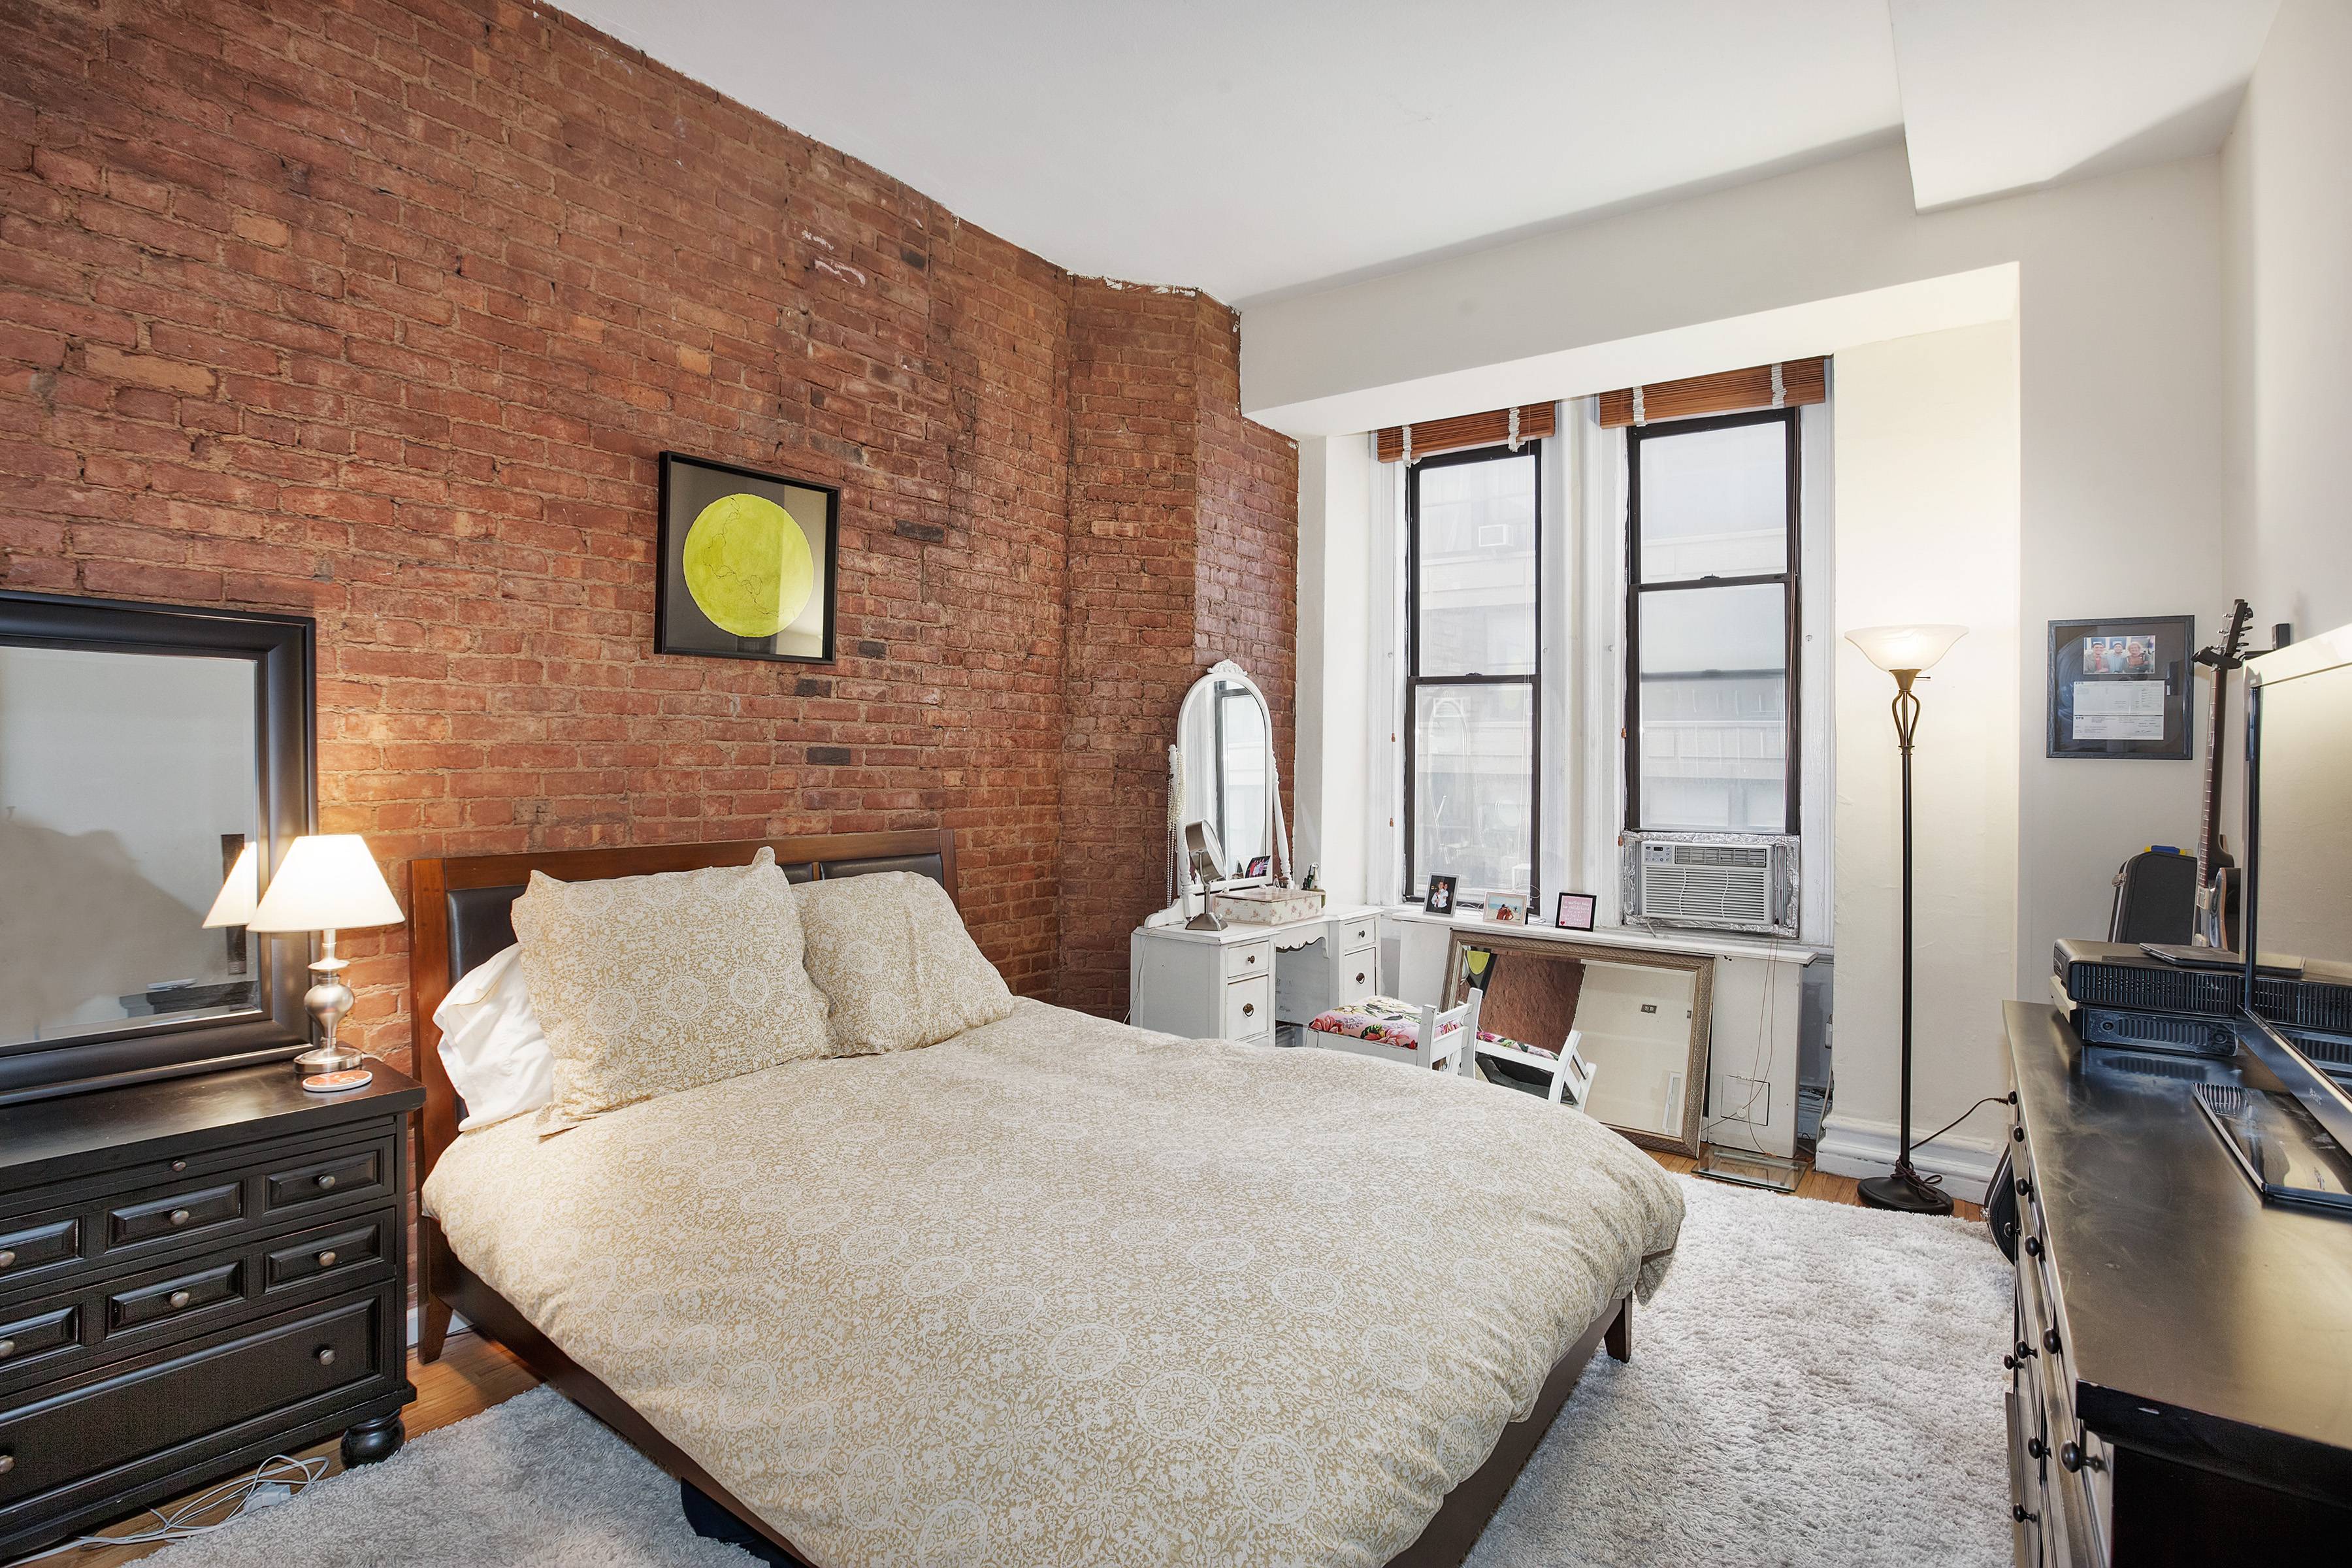 Flatiron Extra Large King Sized 1BR Sun-Blasted with 10FT Ceilings, Exposed Brick And Original Hard Wood Floors